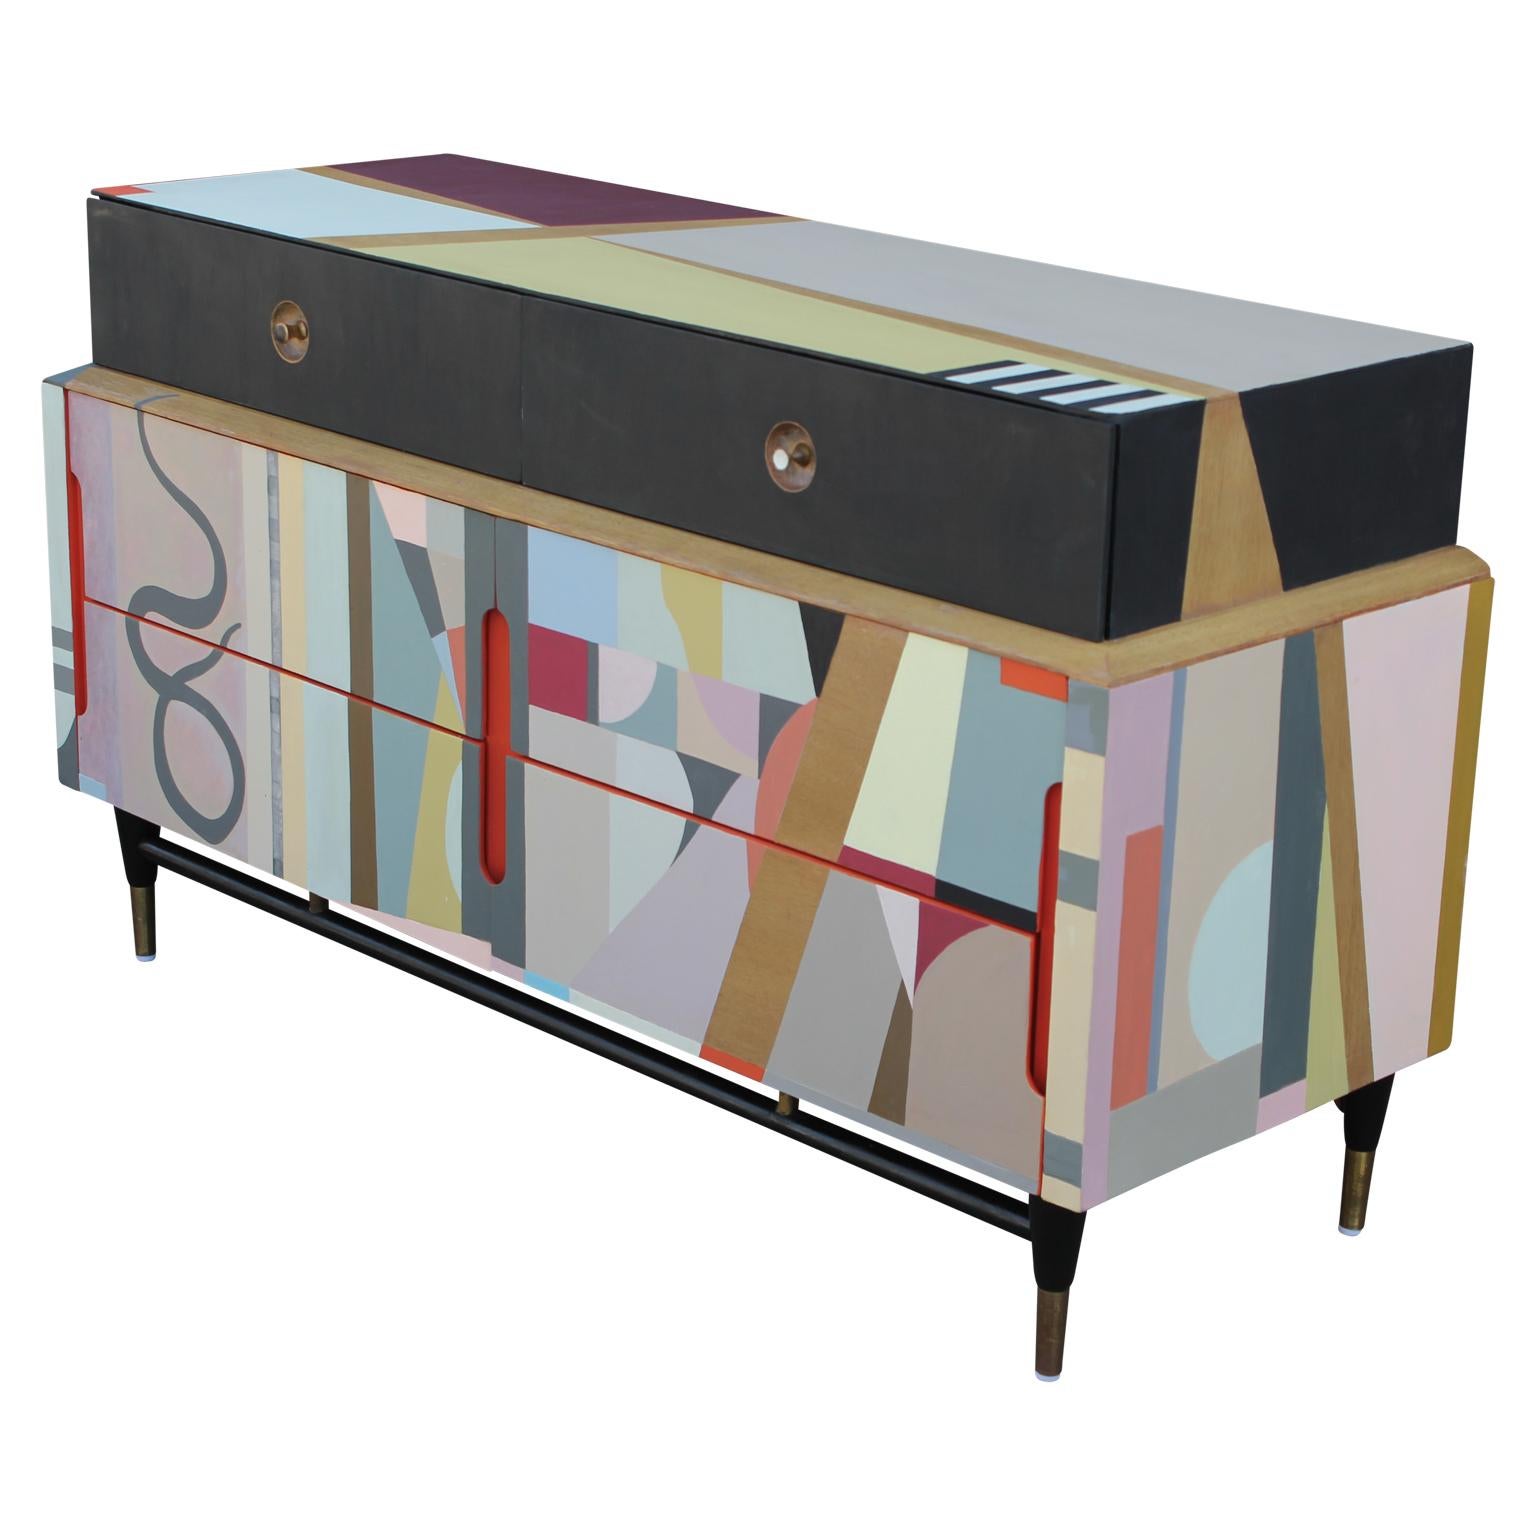 A beautiful modern six-drawer dresser painted in a colorful custom abstract design. This whimsical design and playful characteristic will brighten up any room.